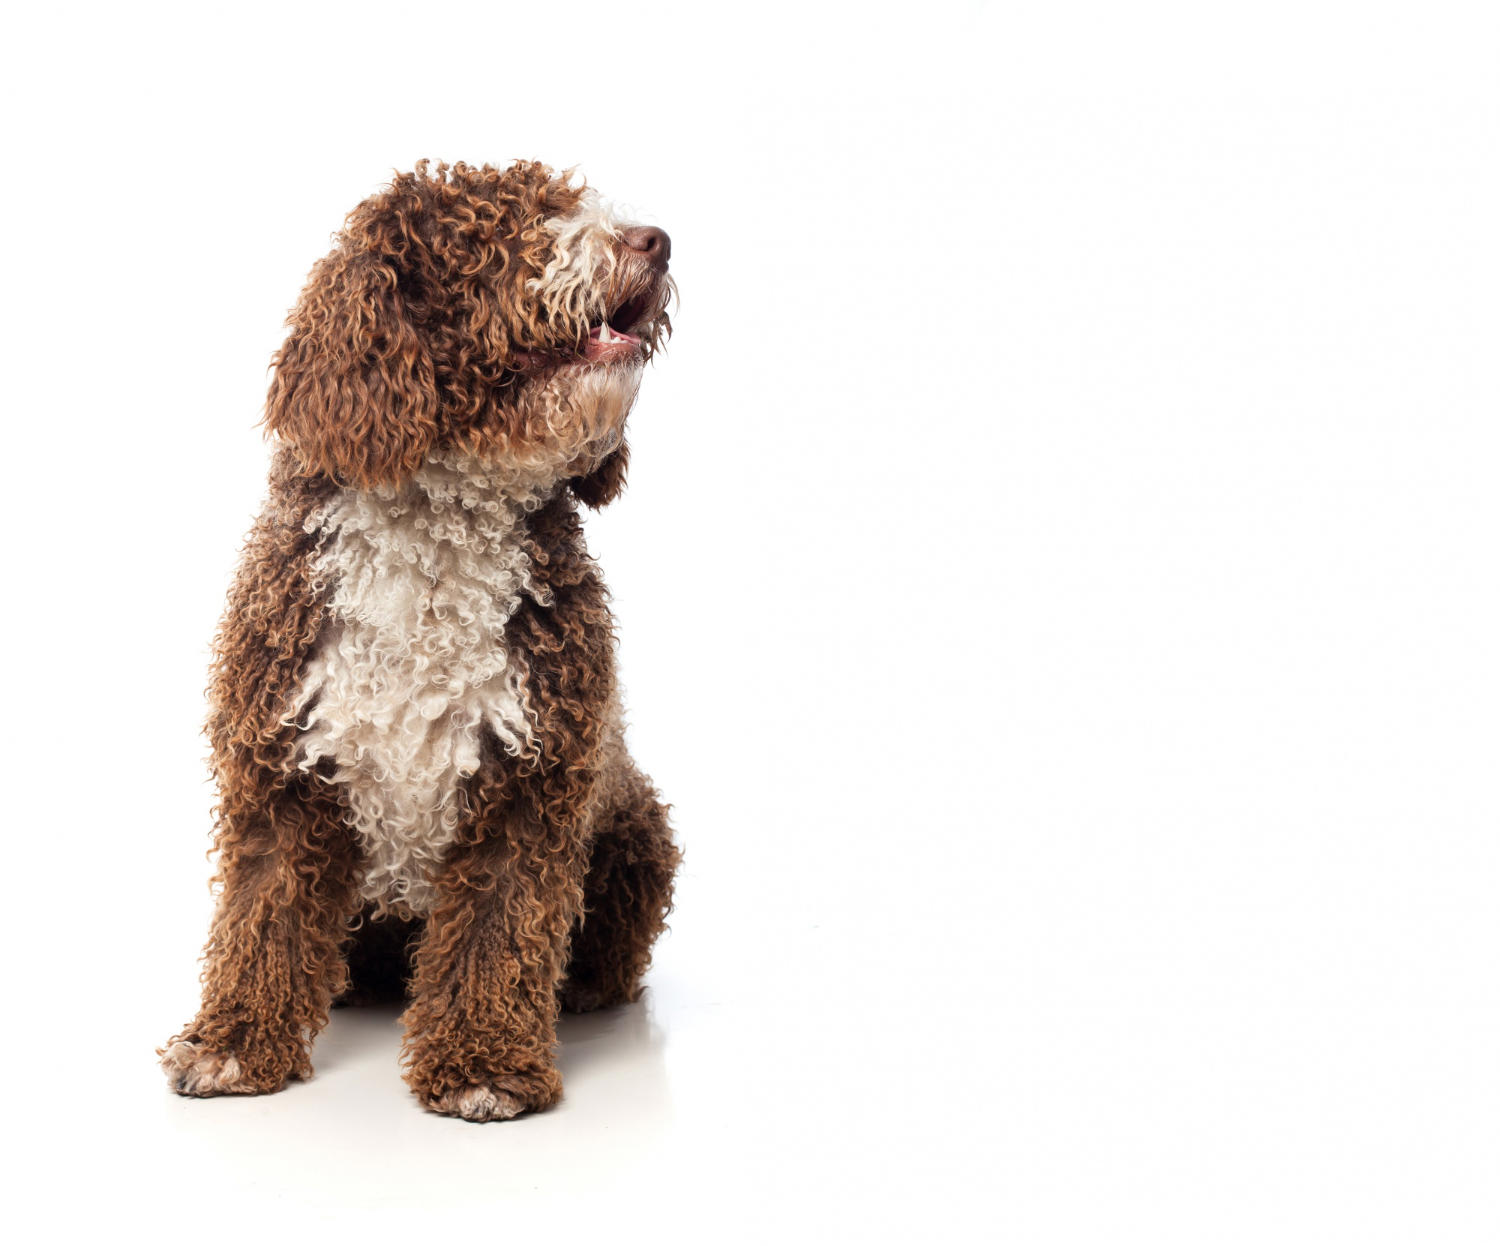 "Uncovering the Average Lifespan of Mini Goldendoodles"